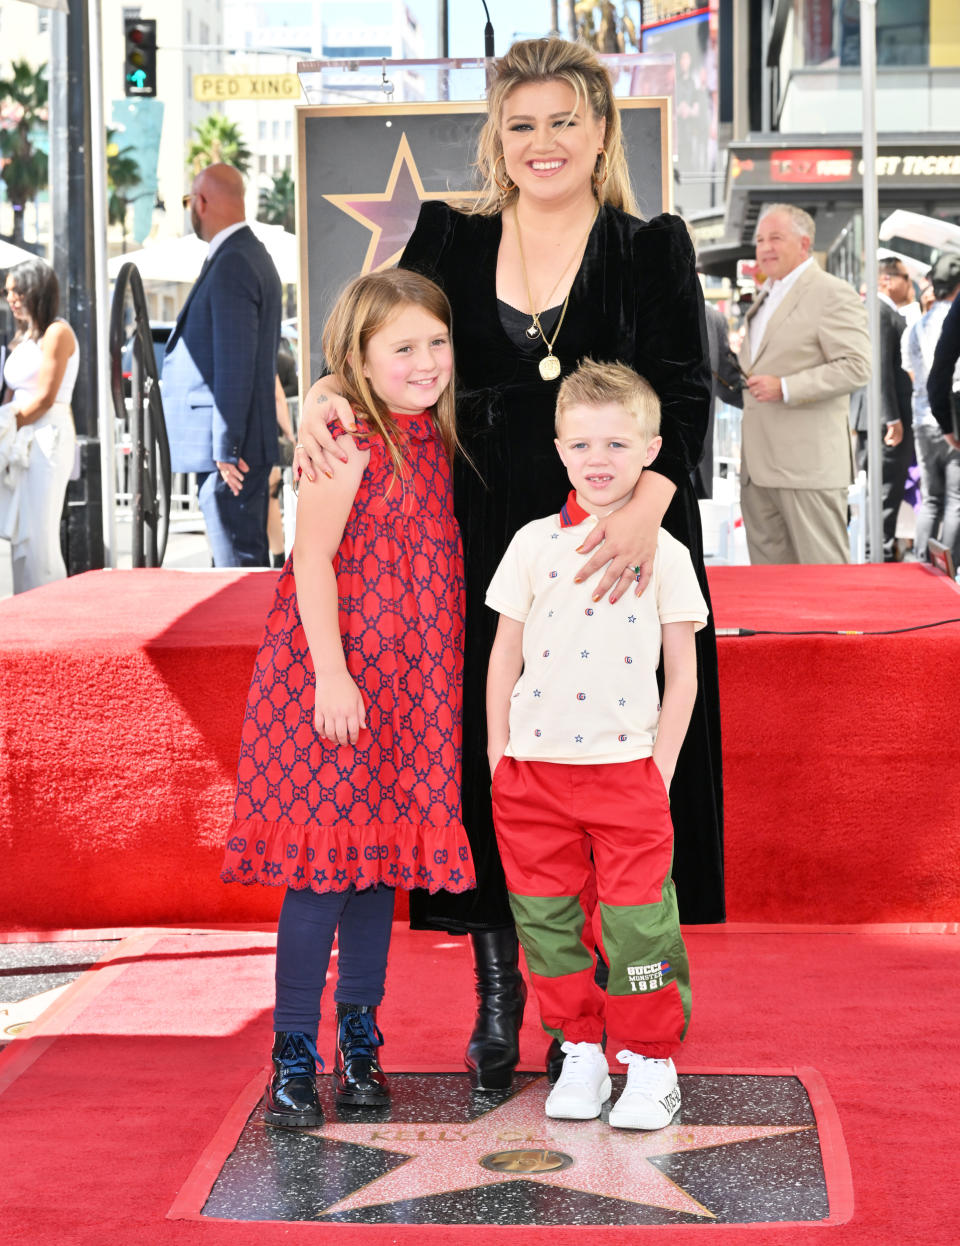 Kelly Clarkson and children River Rose Blackstock and Remington Alexander Blackstock at the Star Ceremony for Kelly Clarkson on September 19, 2022 in Los Angeles, CA. (Michael Buckner / Variety via Getty Images)